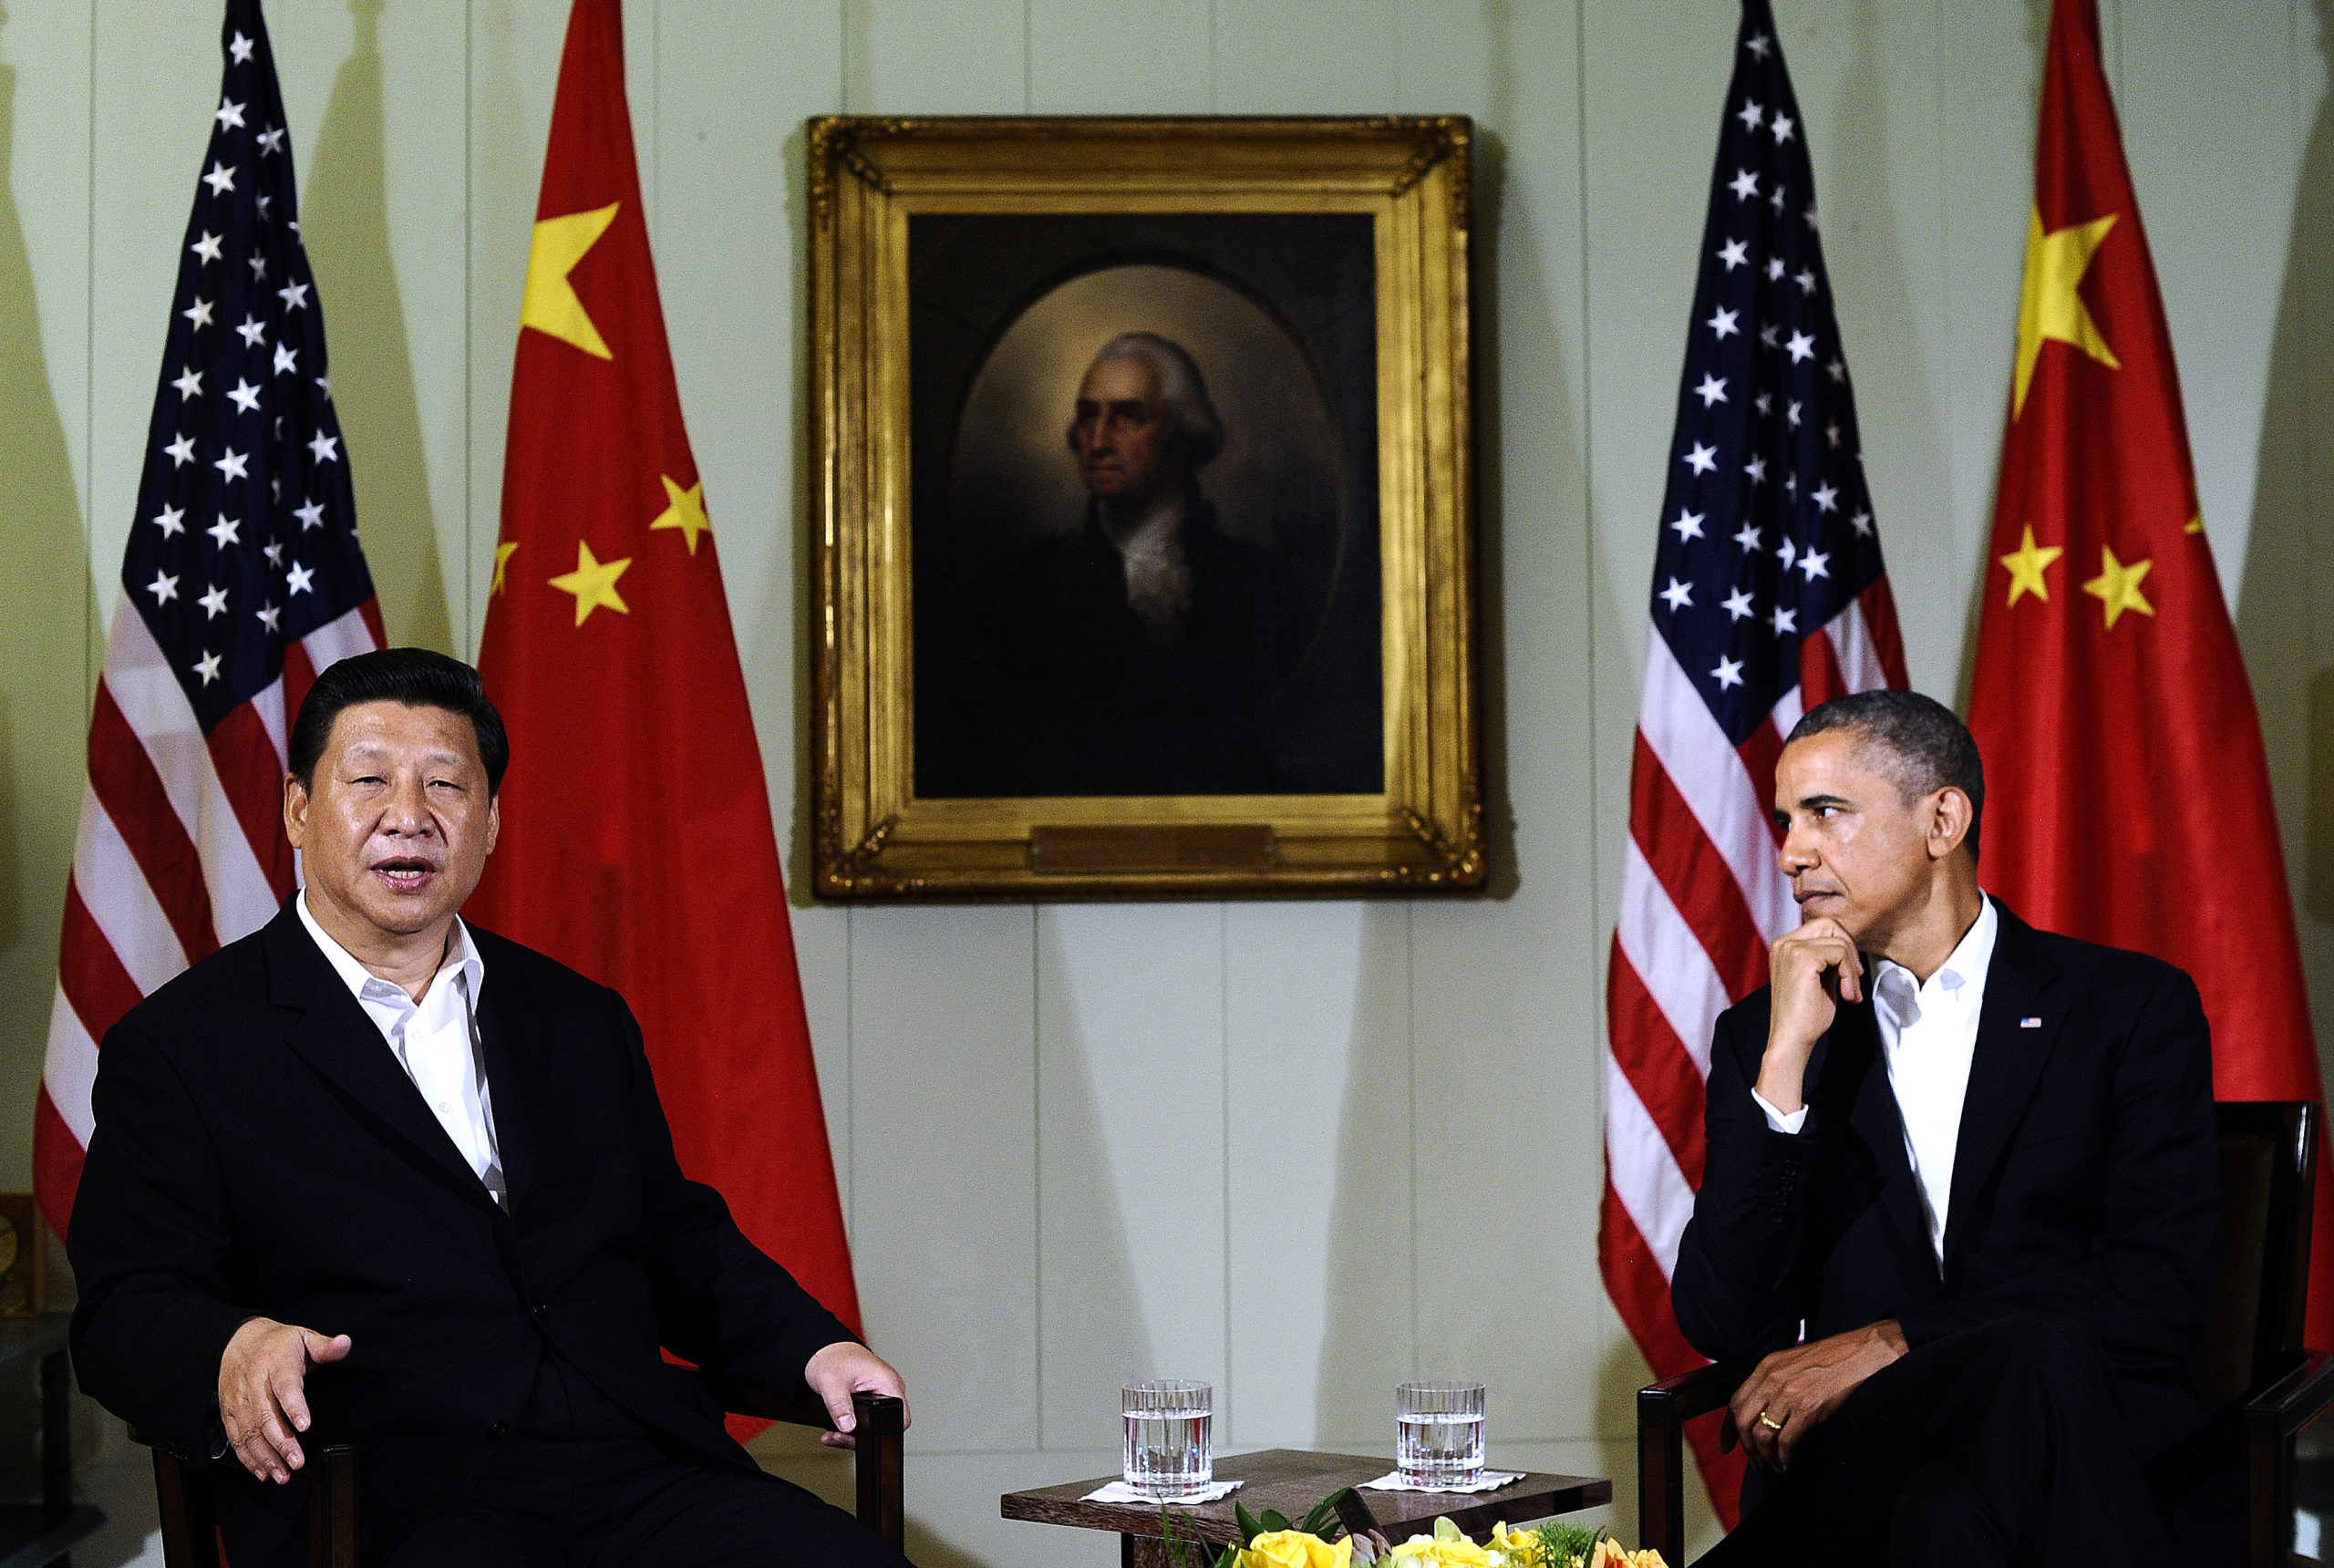 US President Barack Obama (R) listens as Chinese President Xi Jinping answers a question following their bilateral meeting at the Annenberg Retreat at Sunnylands in Rancho Mirage, California, on June 7, 2013.Obama, with Chinese counterpart Xi Jinping by his side, called Friday for common rules on cybersecurity after allegations of hacking by Beijing. At a summit in the Calfornia desert, Obama said it was "critical" to reach a "permanent understanding" on cybersecurity. He also voiced concern over intellectual theft and urged "common rules of the road." (Photo by Jewel Samad/AFP via Getty Images)